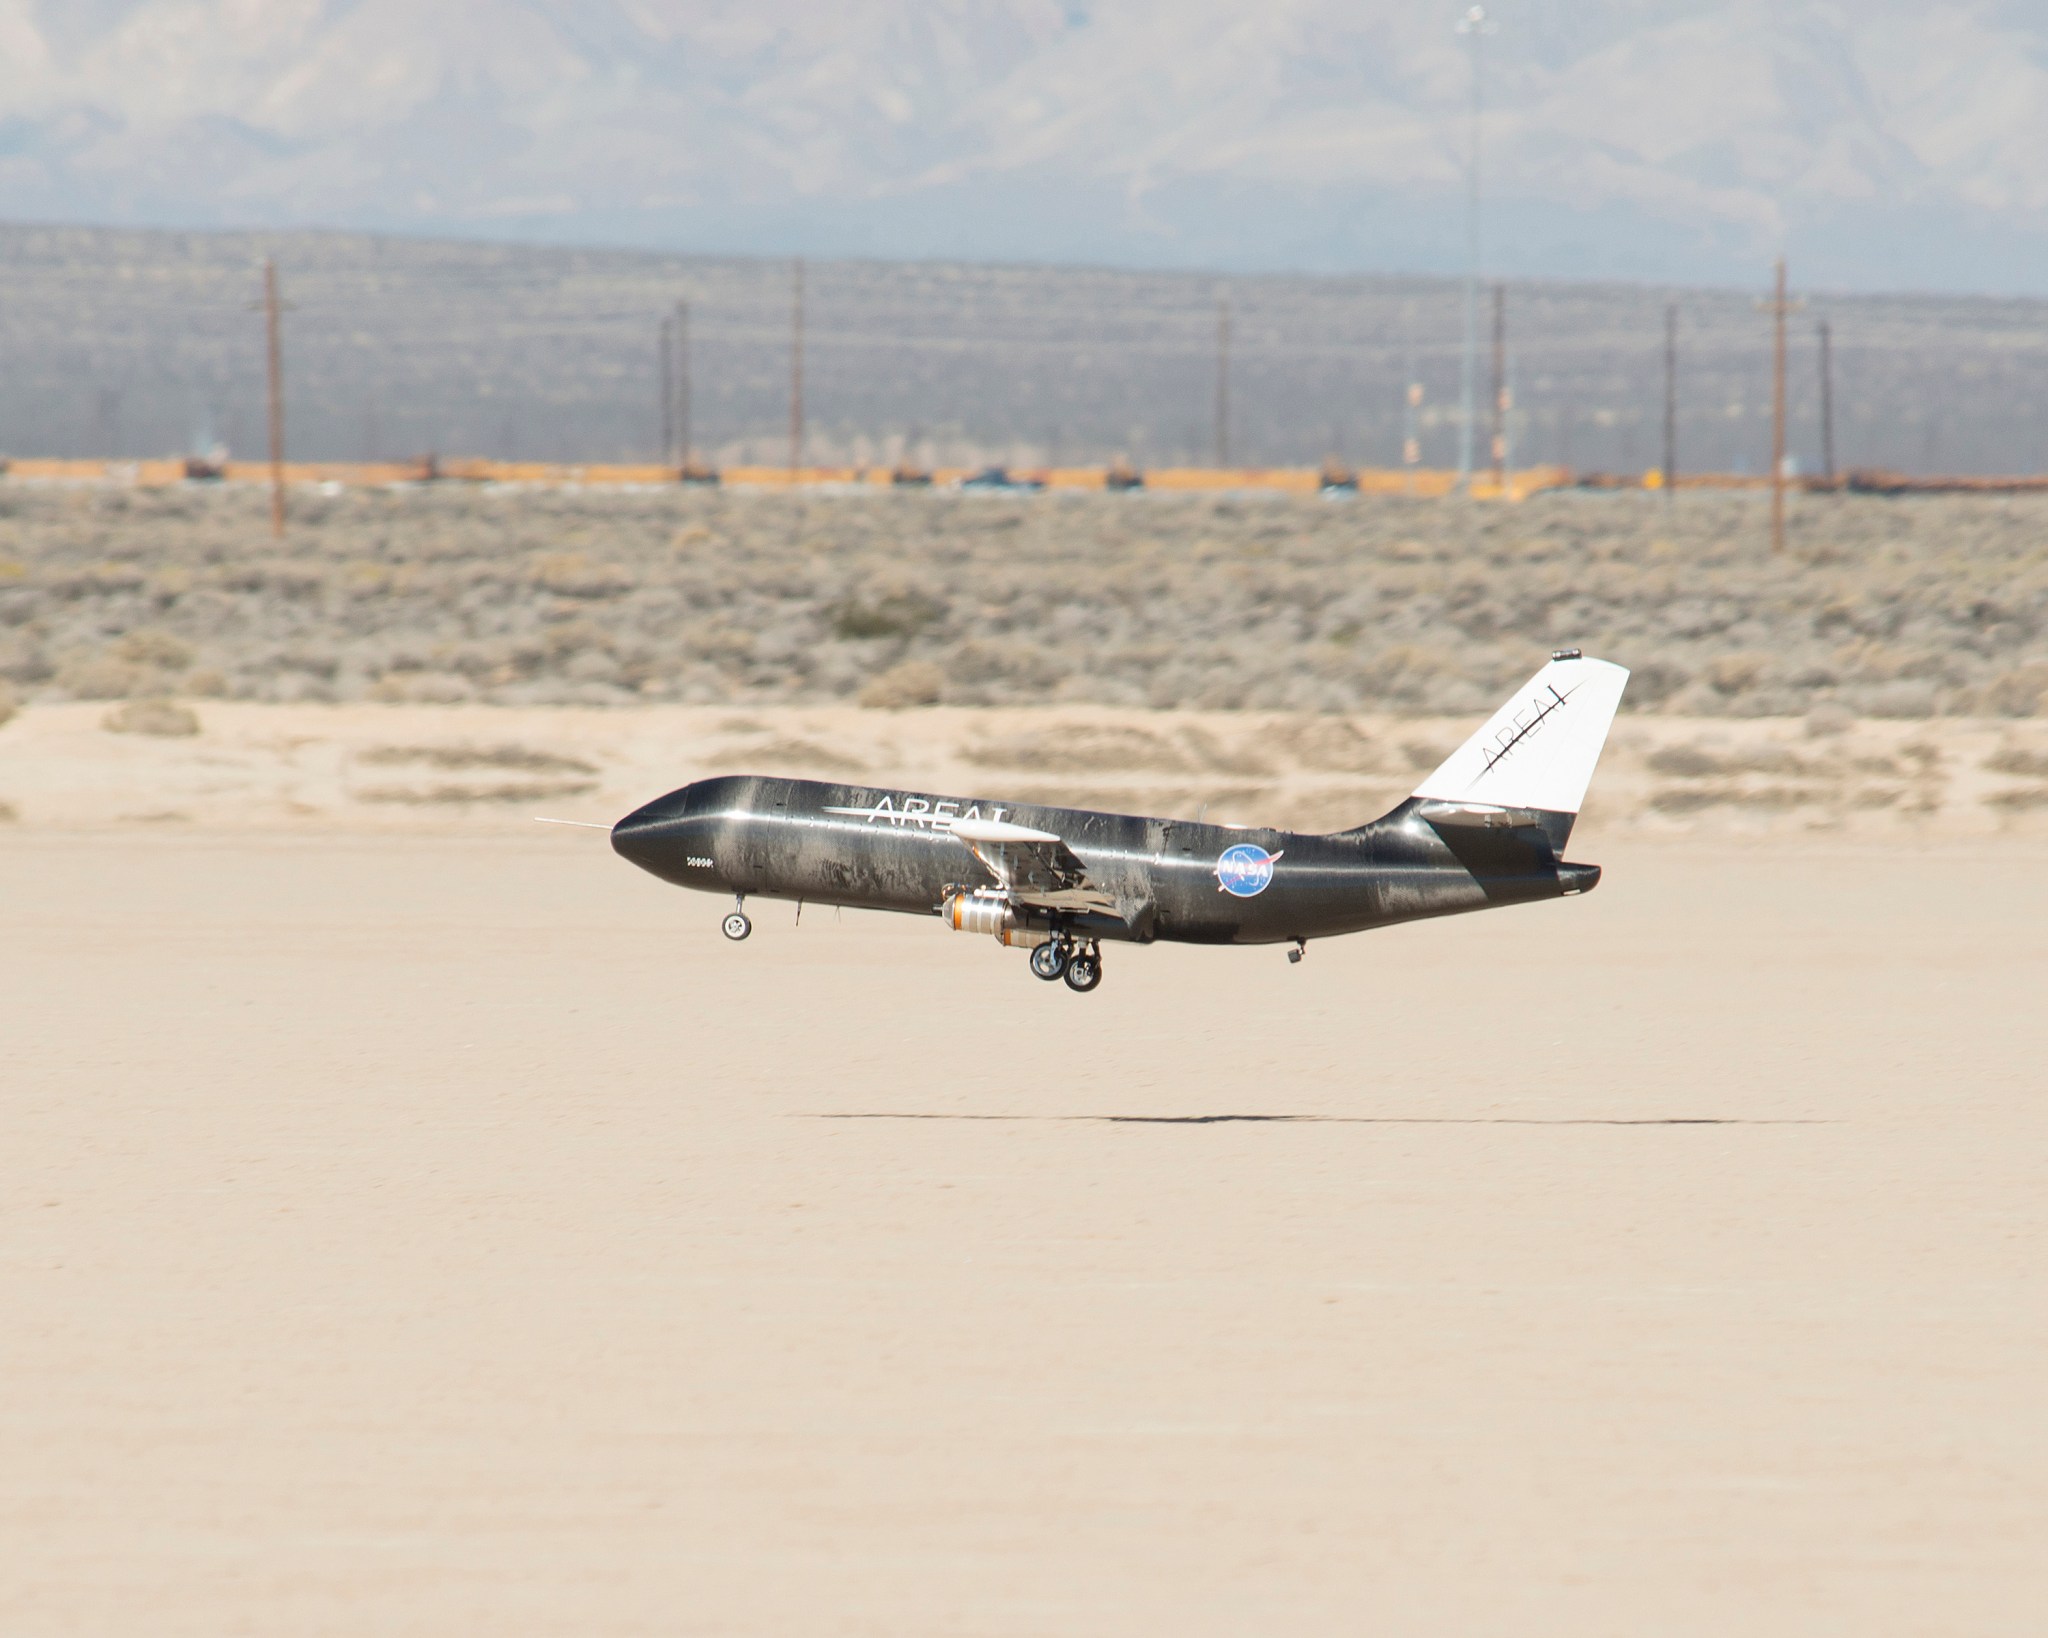 NASA Armstrong’s PTERA remotely piloted research aircraft made its first flight on October 22, 2015.